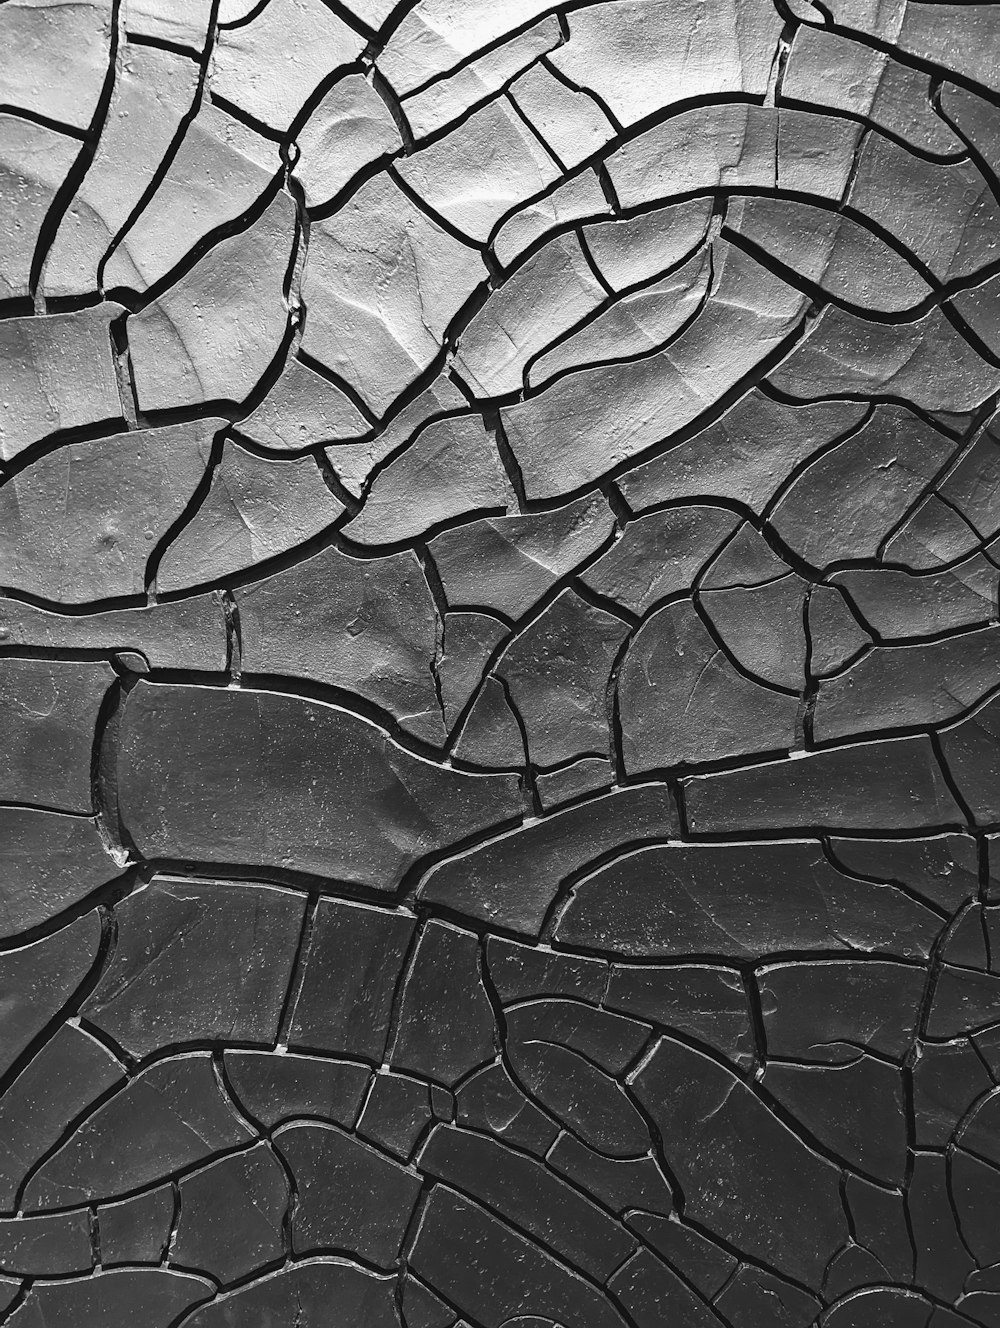 a black and white photo of a cracked surface